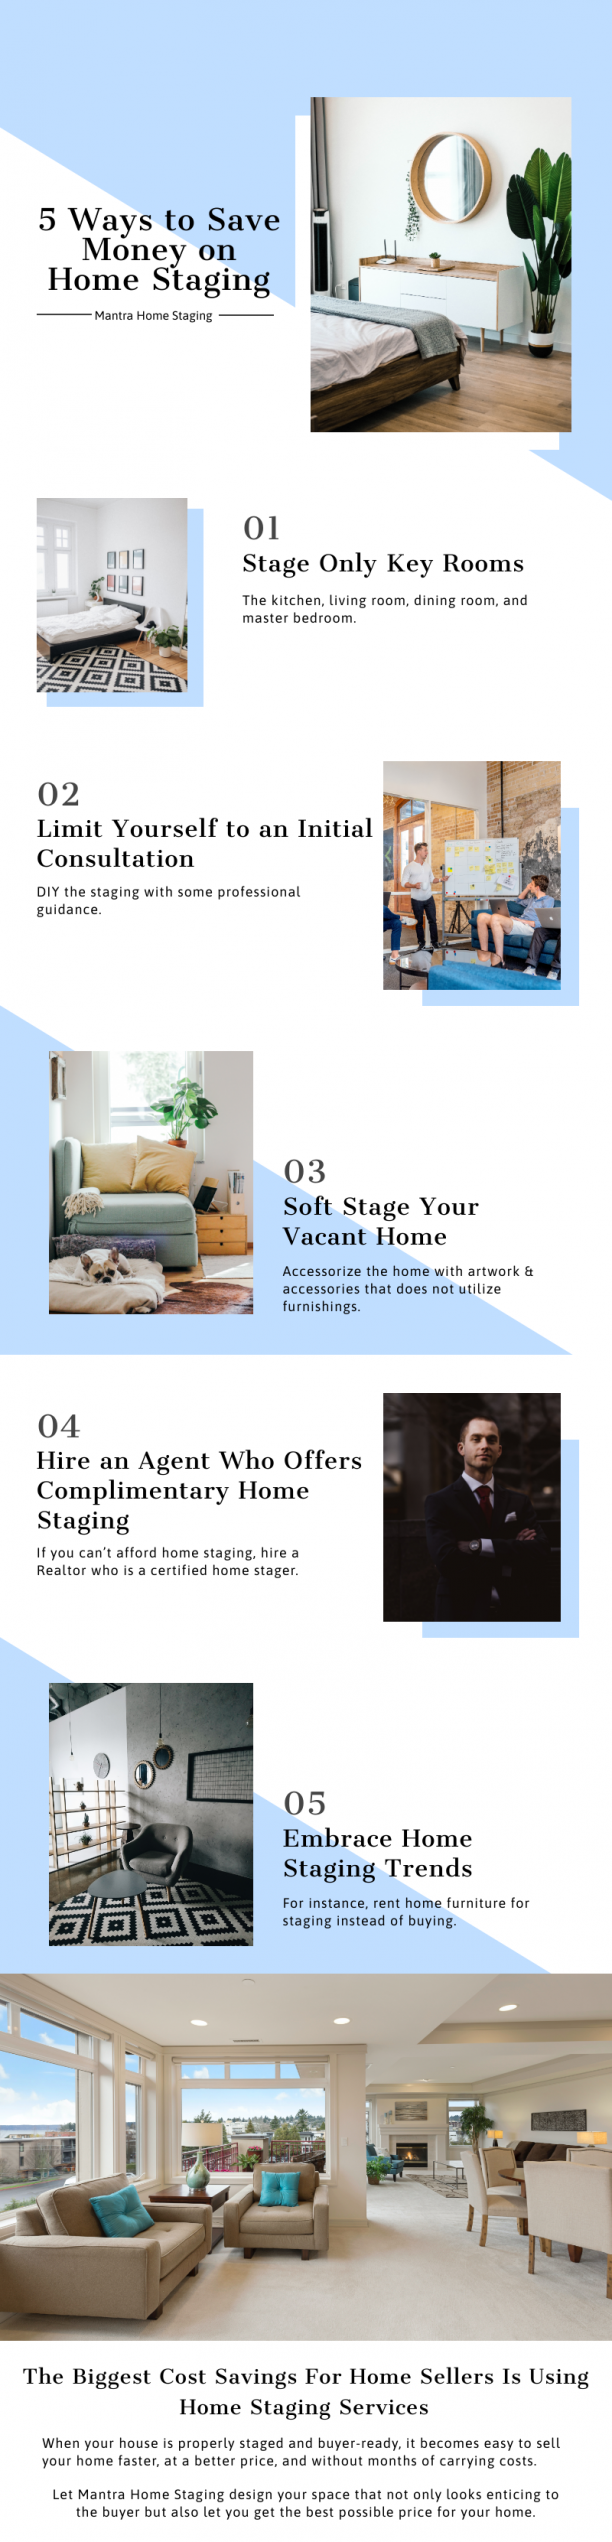 5 Ways to Save Money on Home Staging